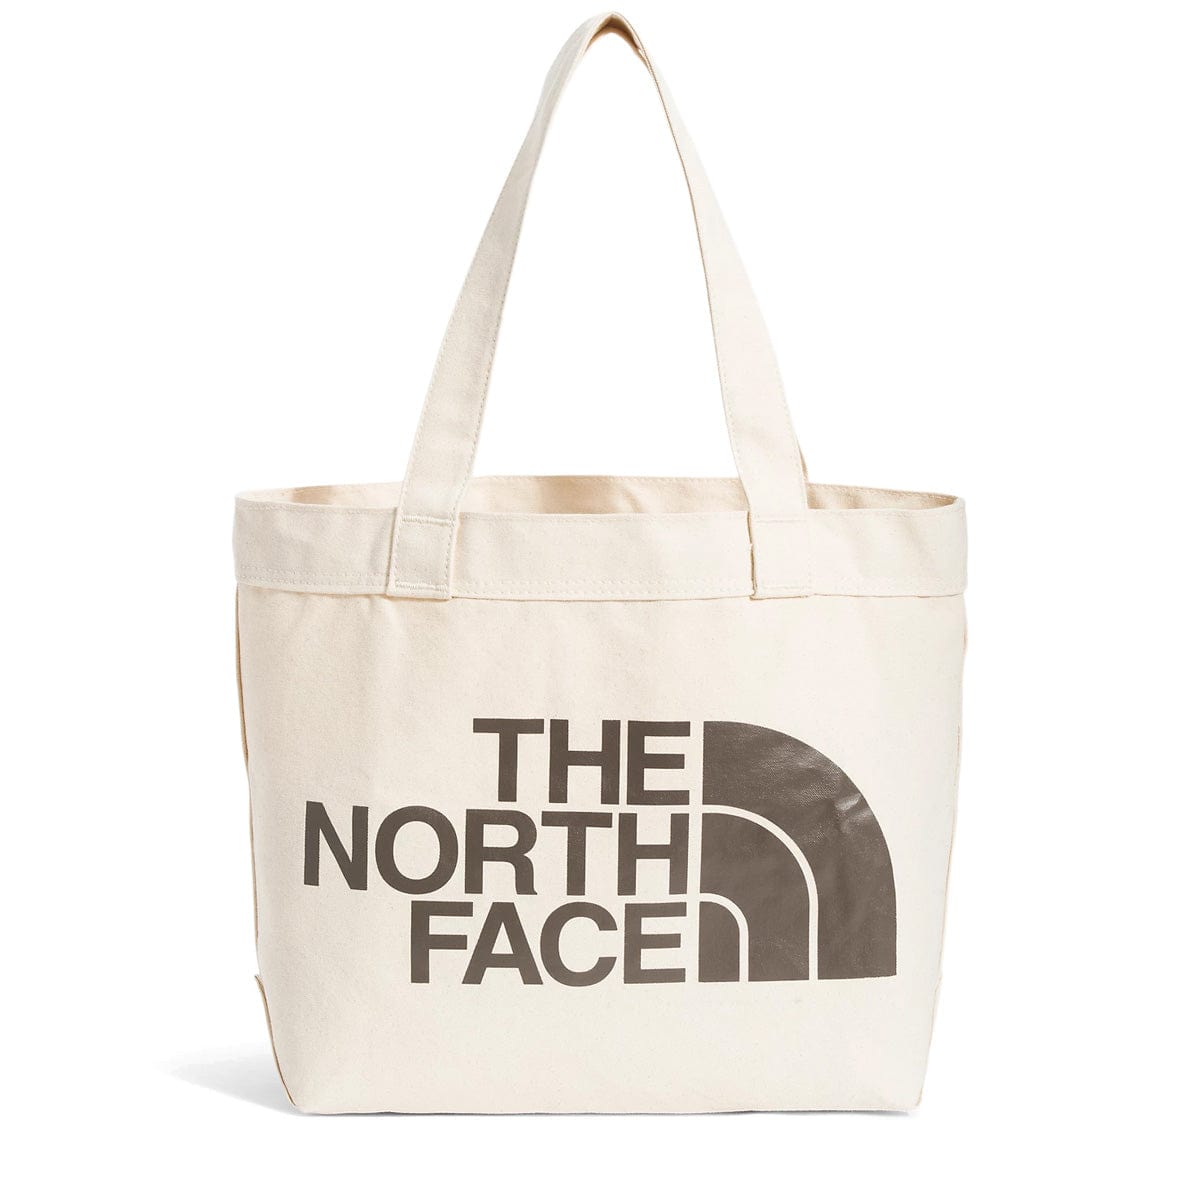 The North Face Bags WEIMARANER BROWN LARGE LOGO PRINT / O/S COTTON TOTE